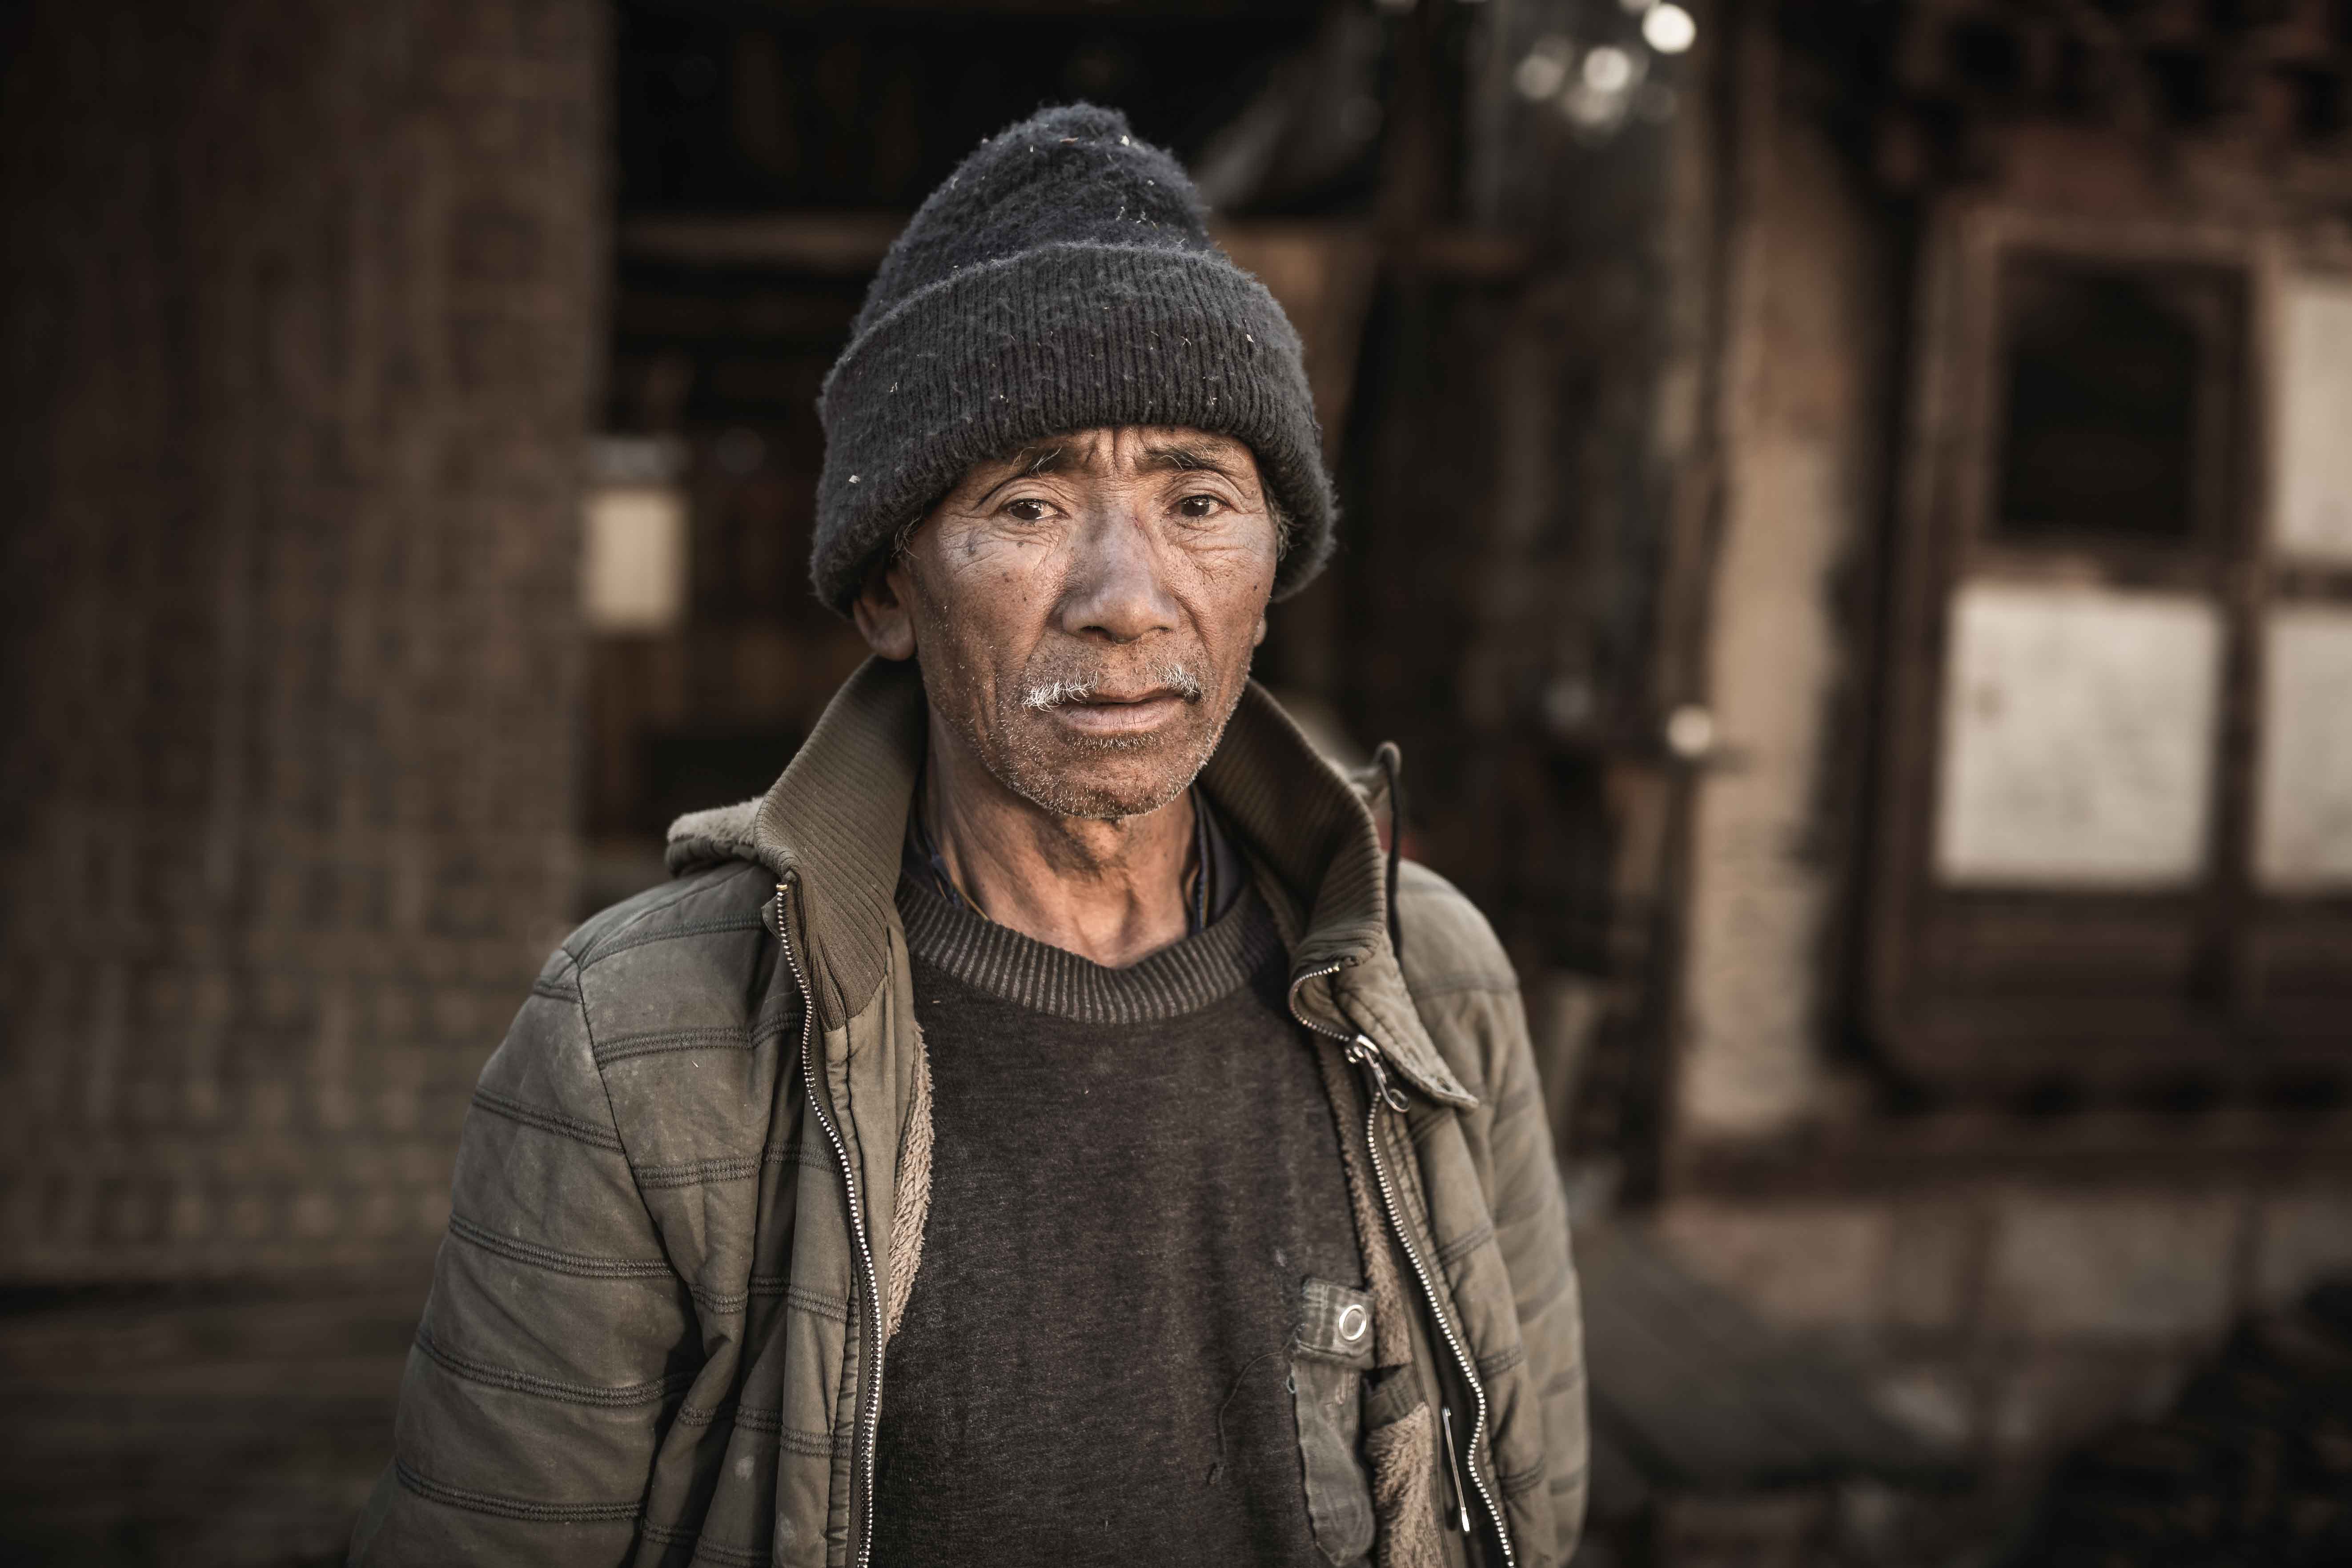 Portrait photography of a man in a village in Bhutan